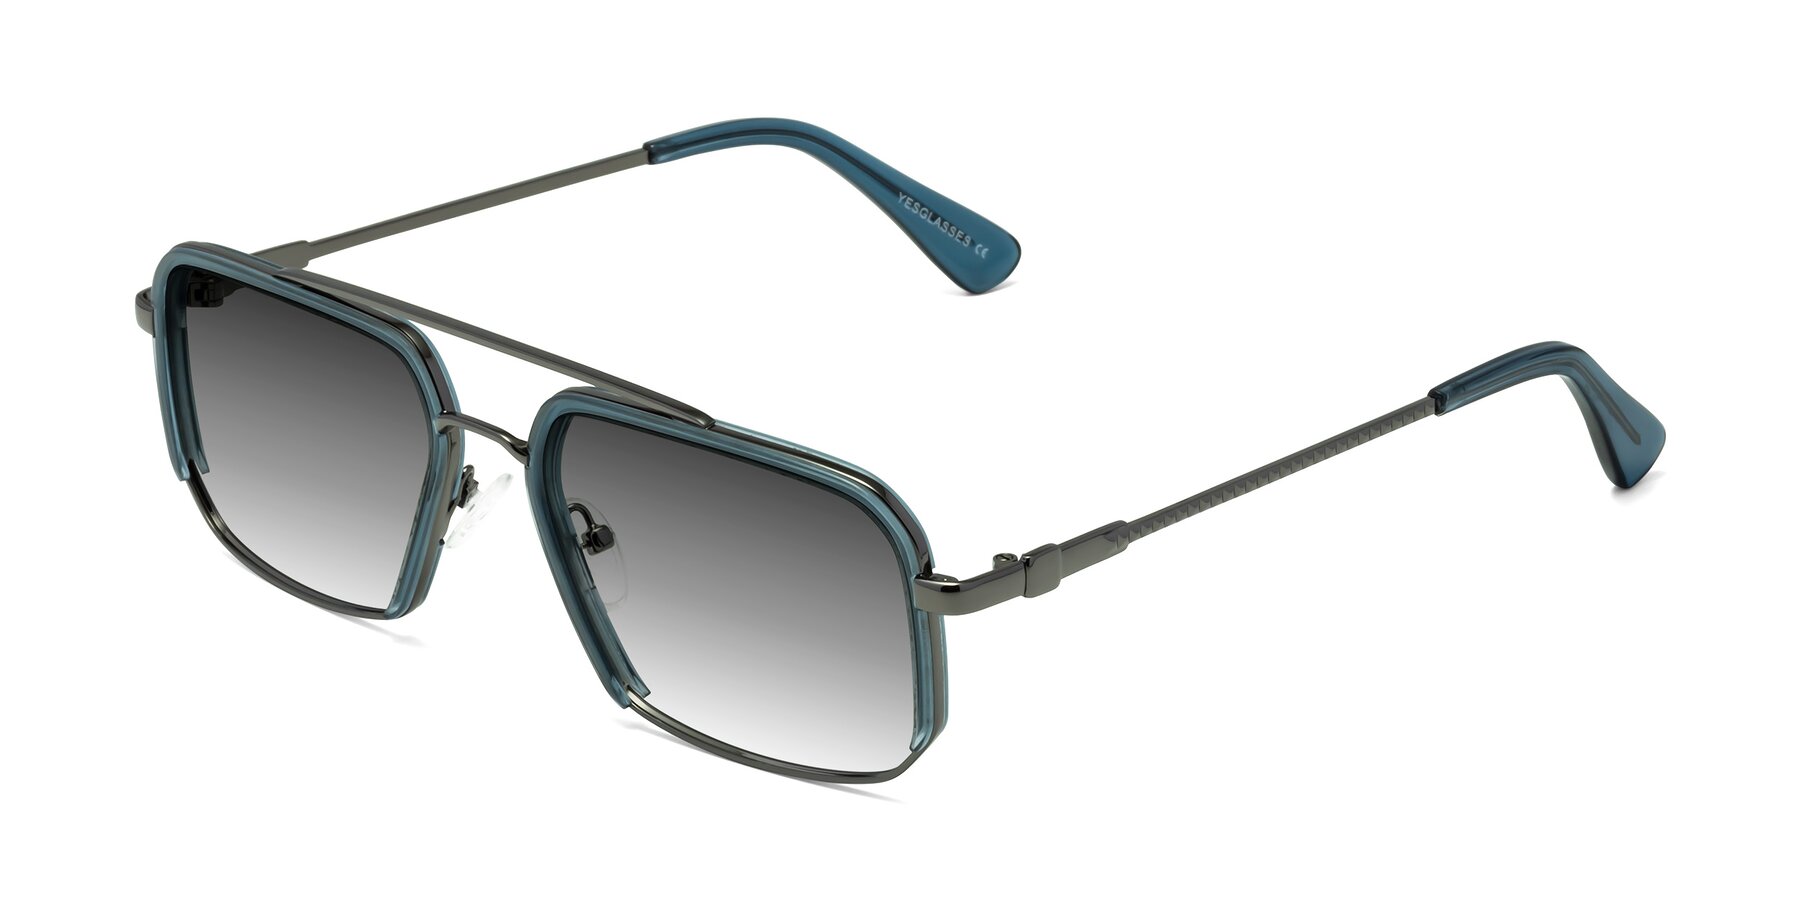 Angle of Dechter in Teal-Gunmetal with Gray Gradient Lenses